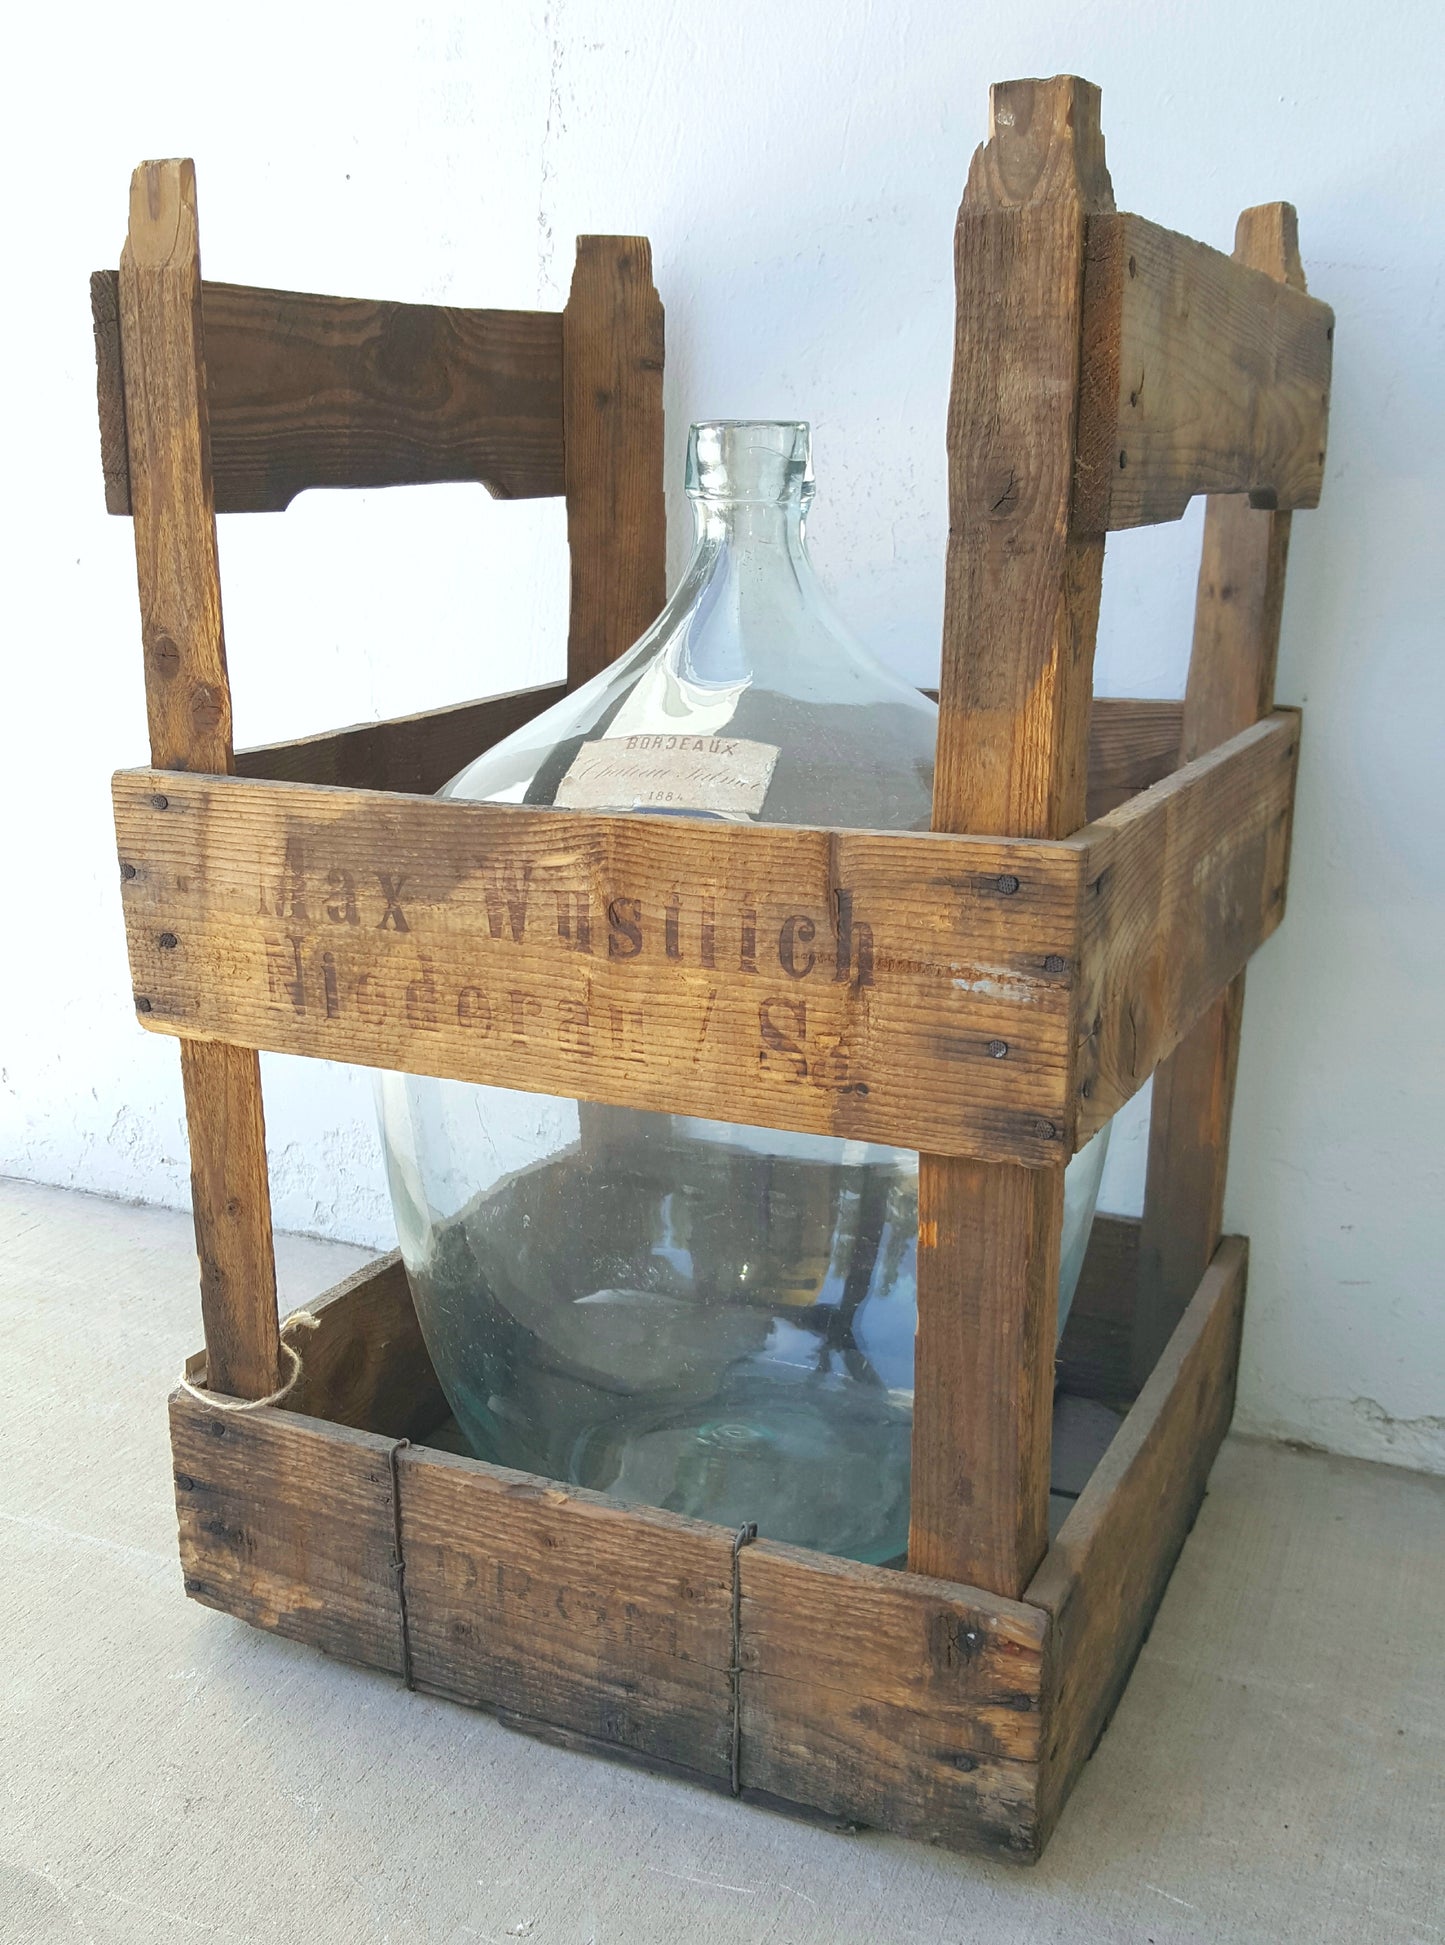 French Wine Bottle in Crate